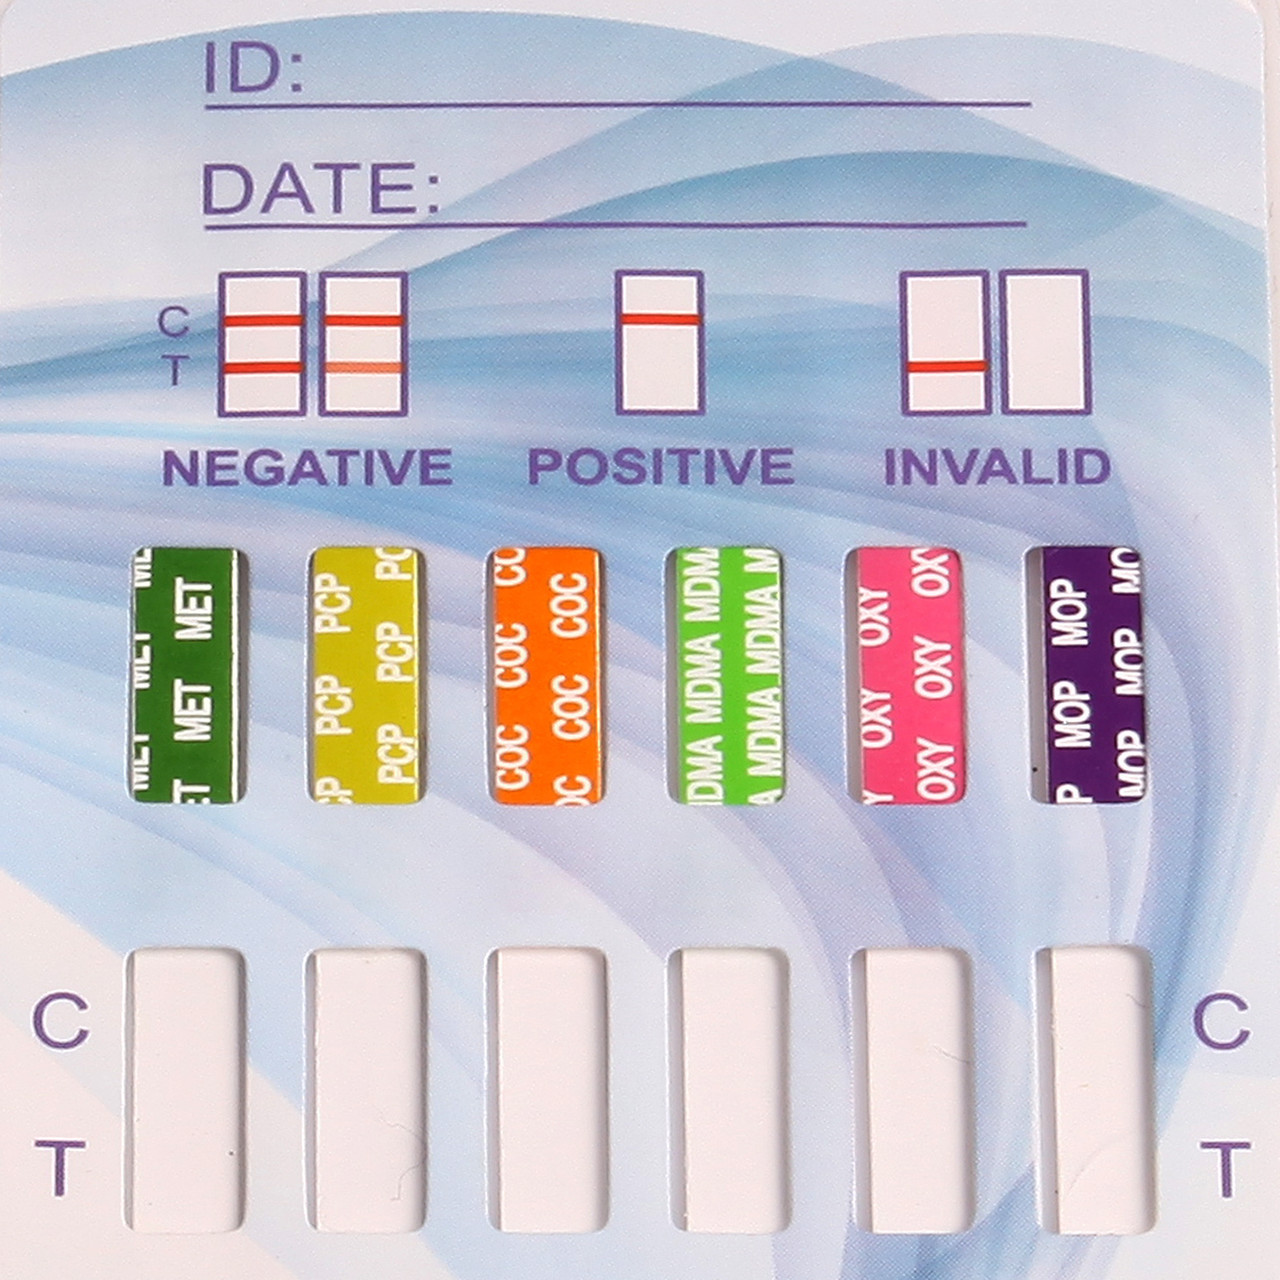 12 Panel Drug Test Dip Card by Healgen CLIA Waived